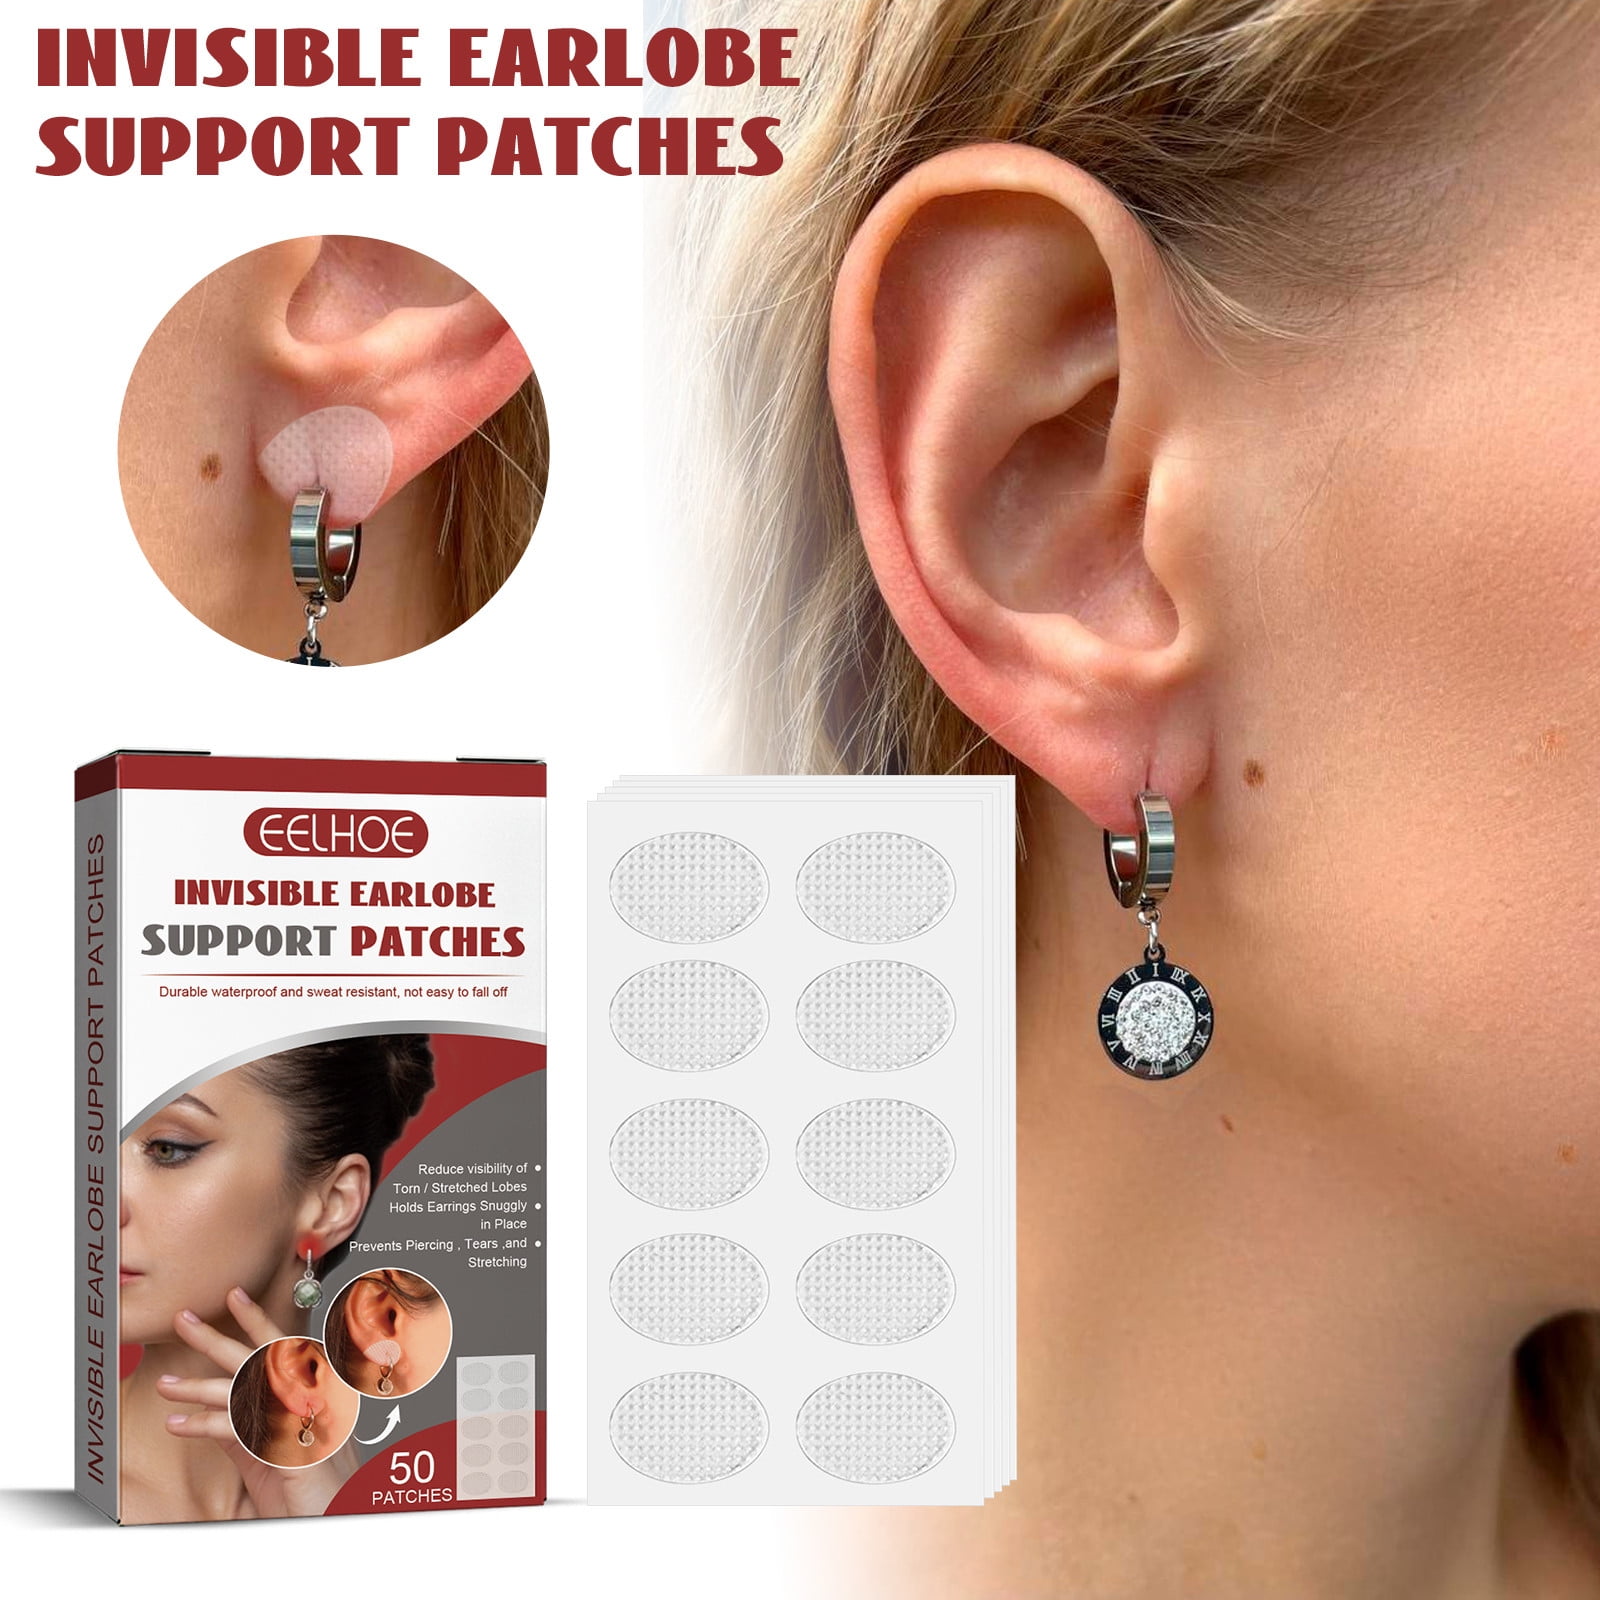 50pcs Ear Lobe Support Patches Invisible Ear Patches Large Earring Lift  Patches For Earrings, Check Out Today's Deals Now